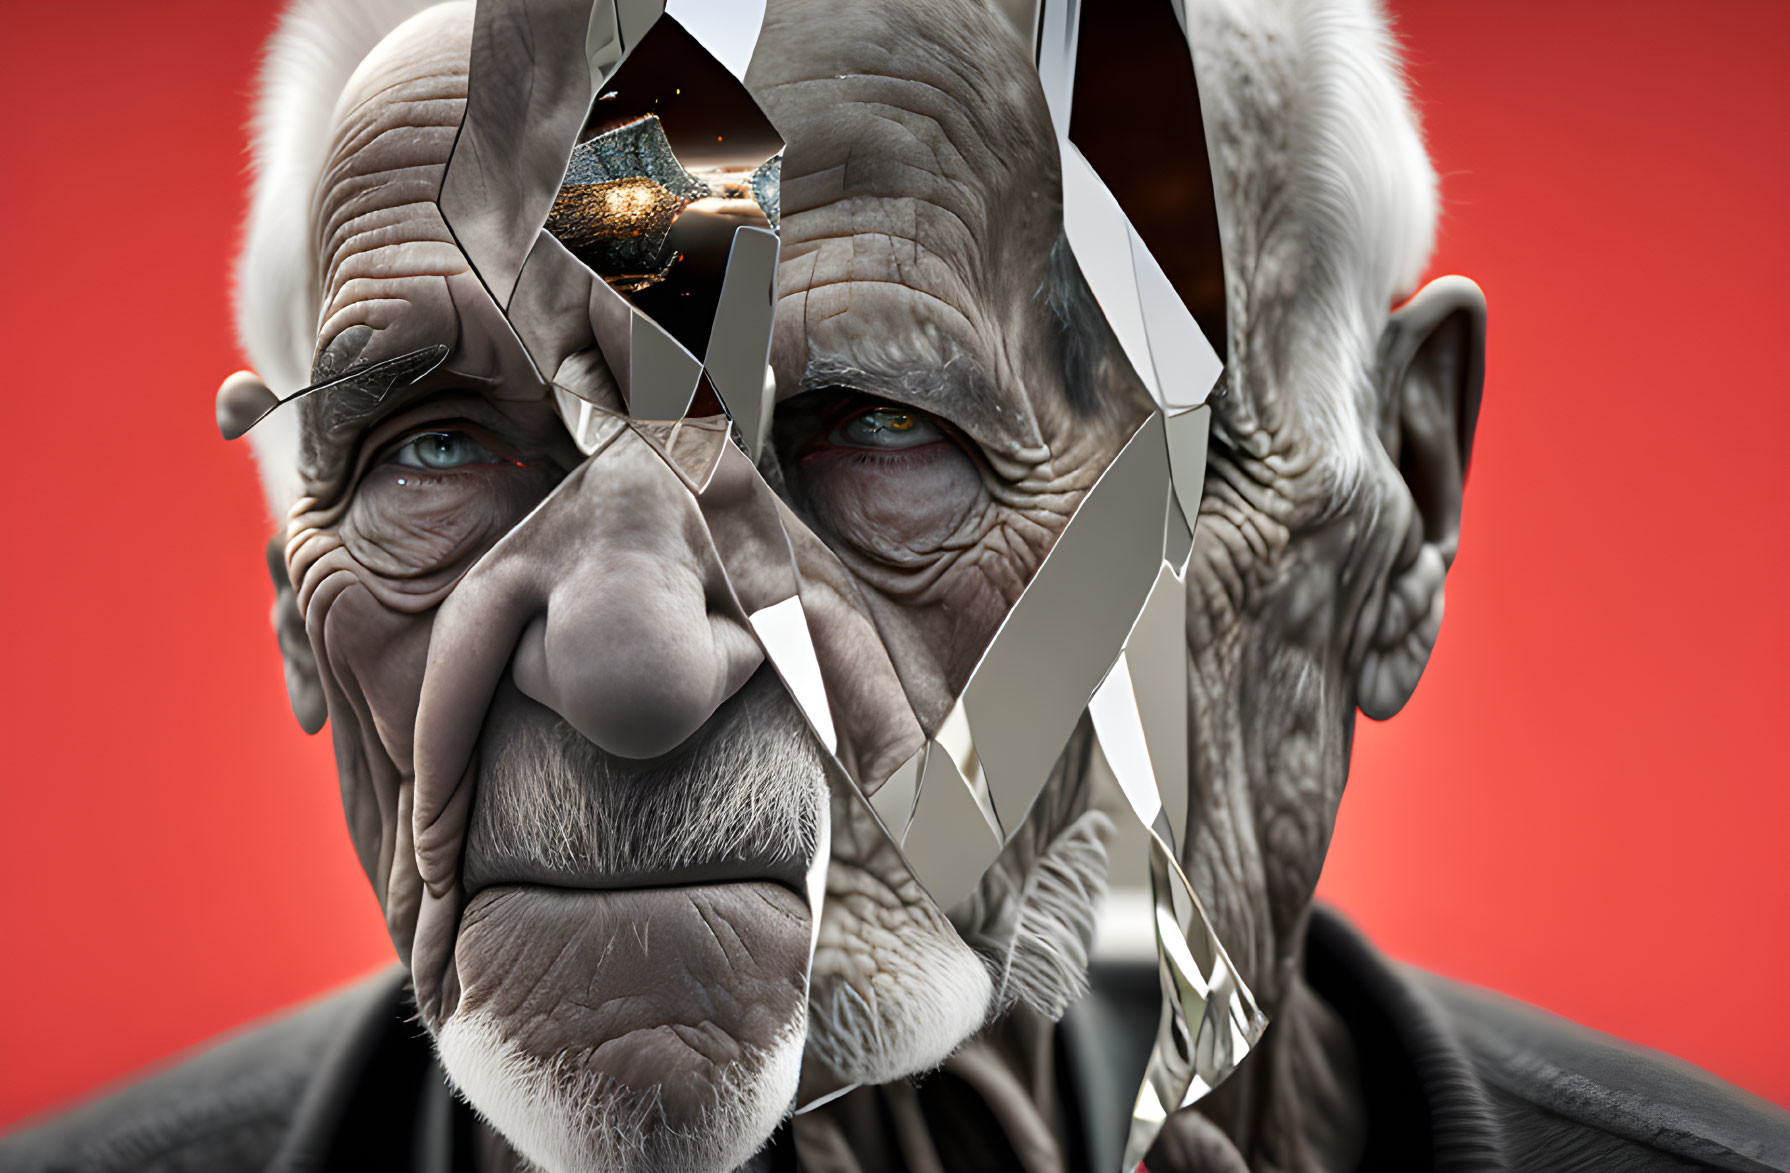 Elderly man's face with fragmented skin revealing metallic structure